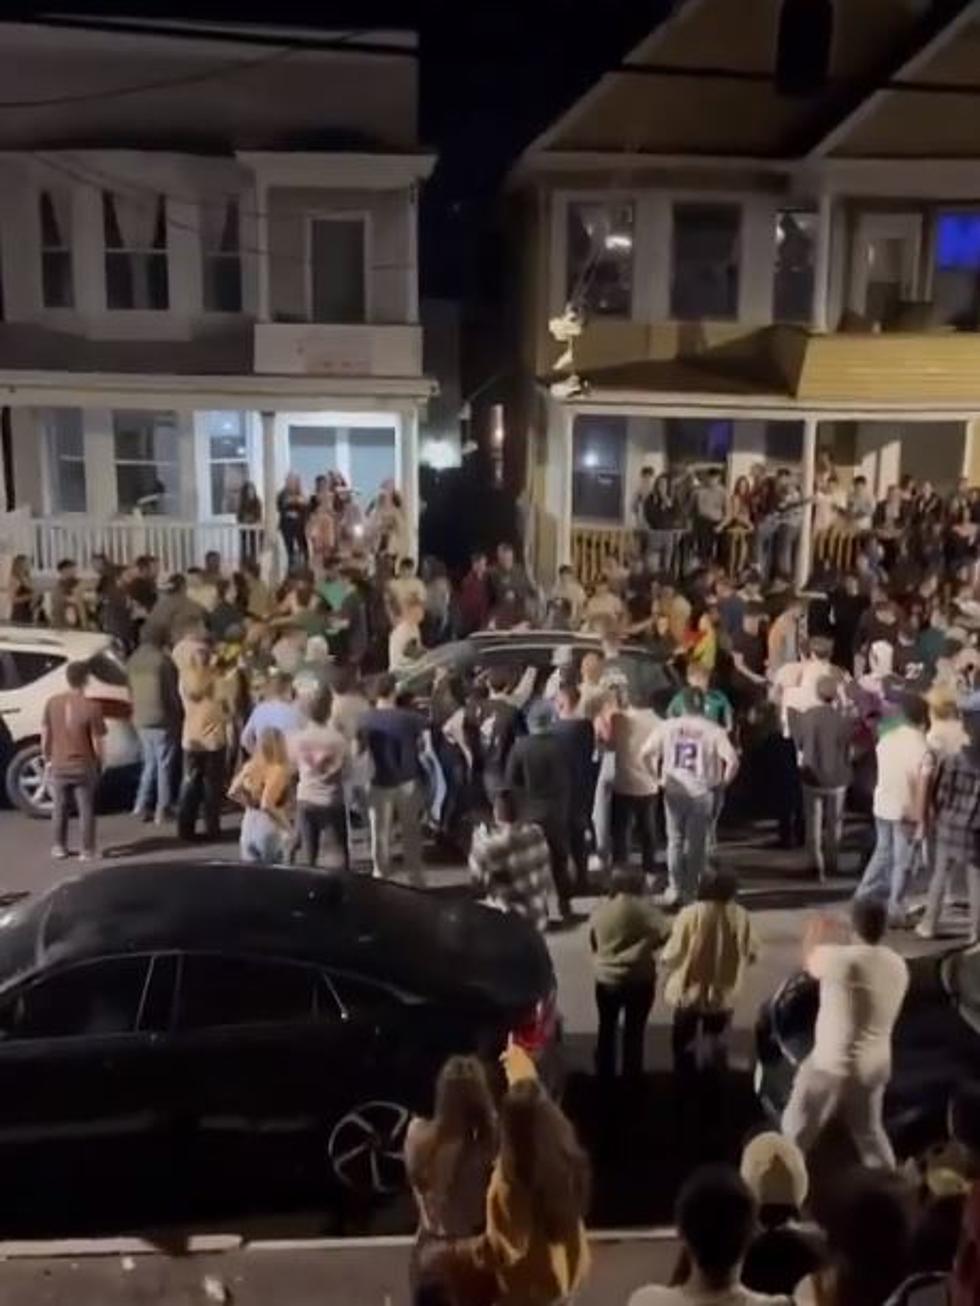 Barstool Posts Viral Video of Big Student Brawl in Albany